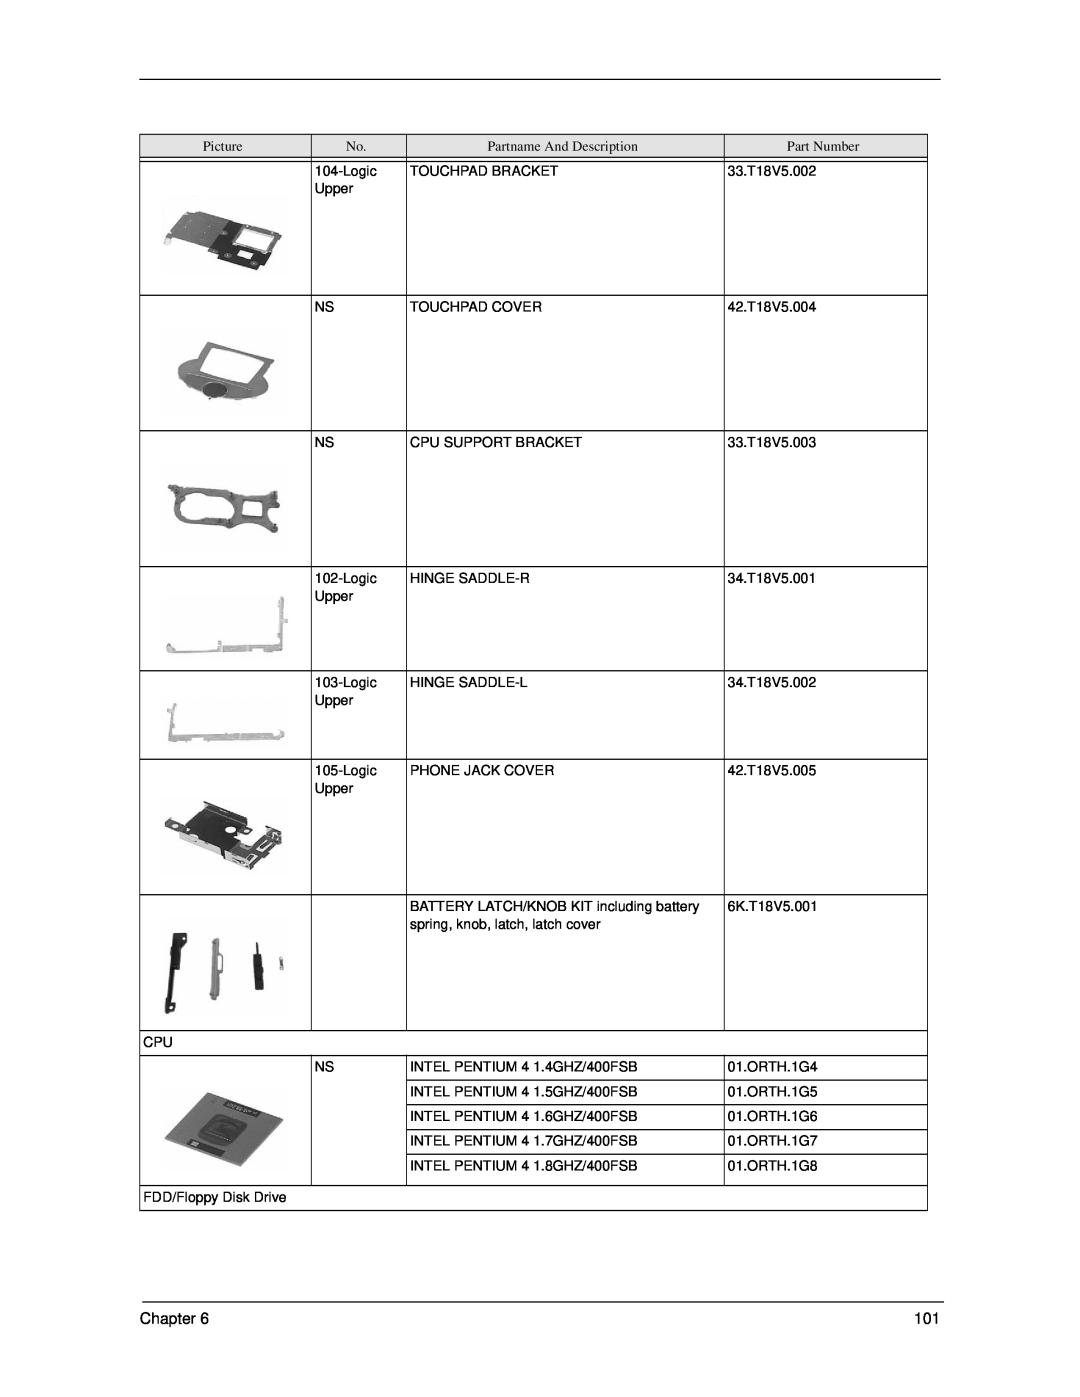 Acer 270 manual Chapter 